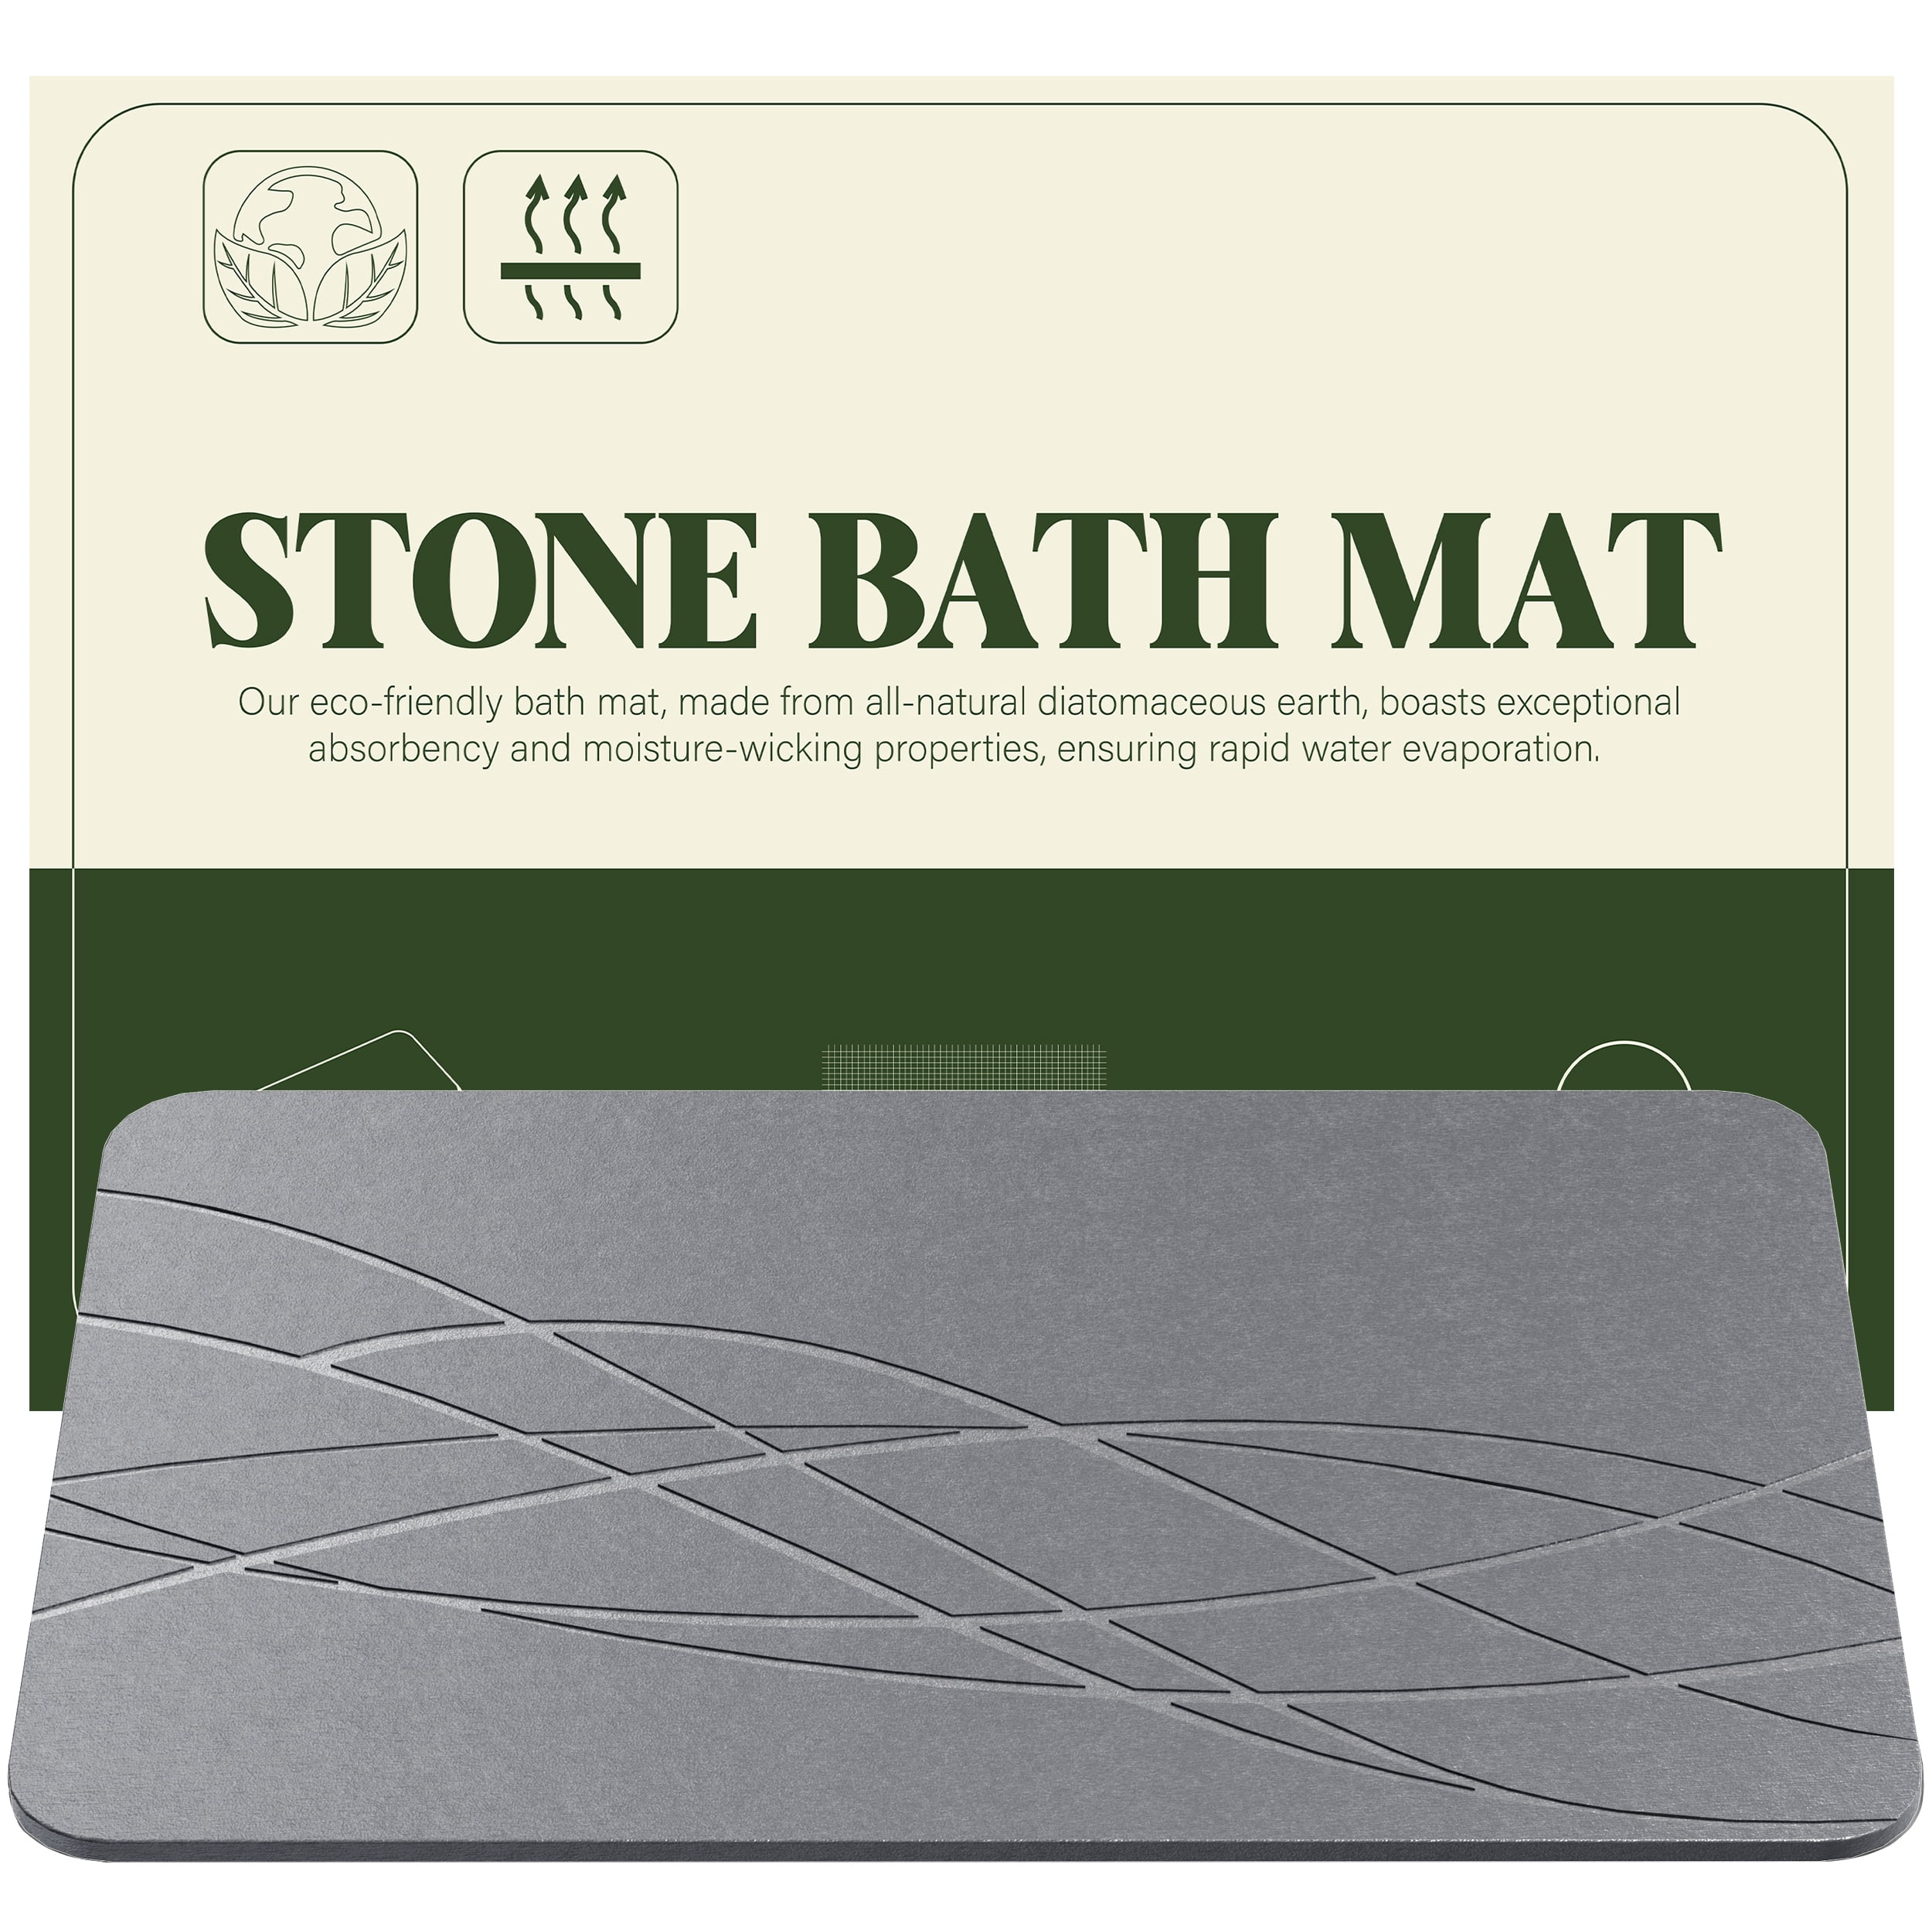 Made with high-quality diatomaceous earth, our Terra Stone Bath